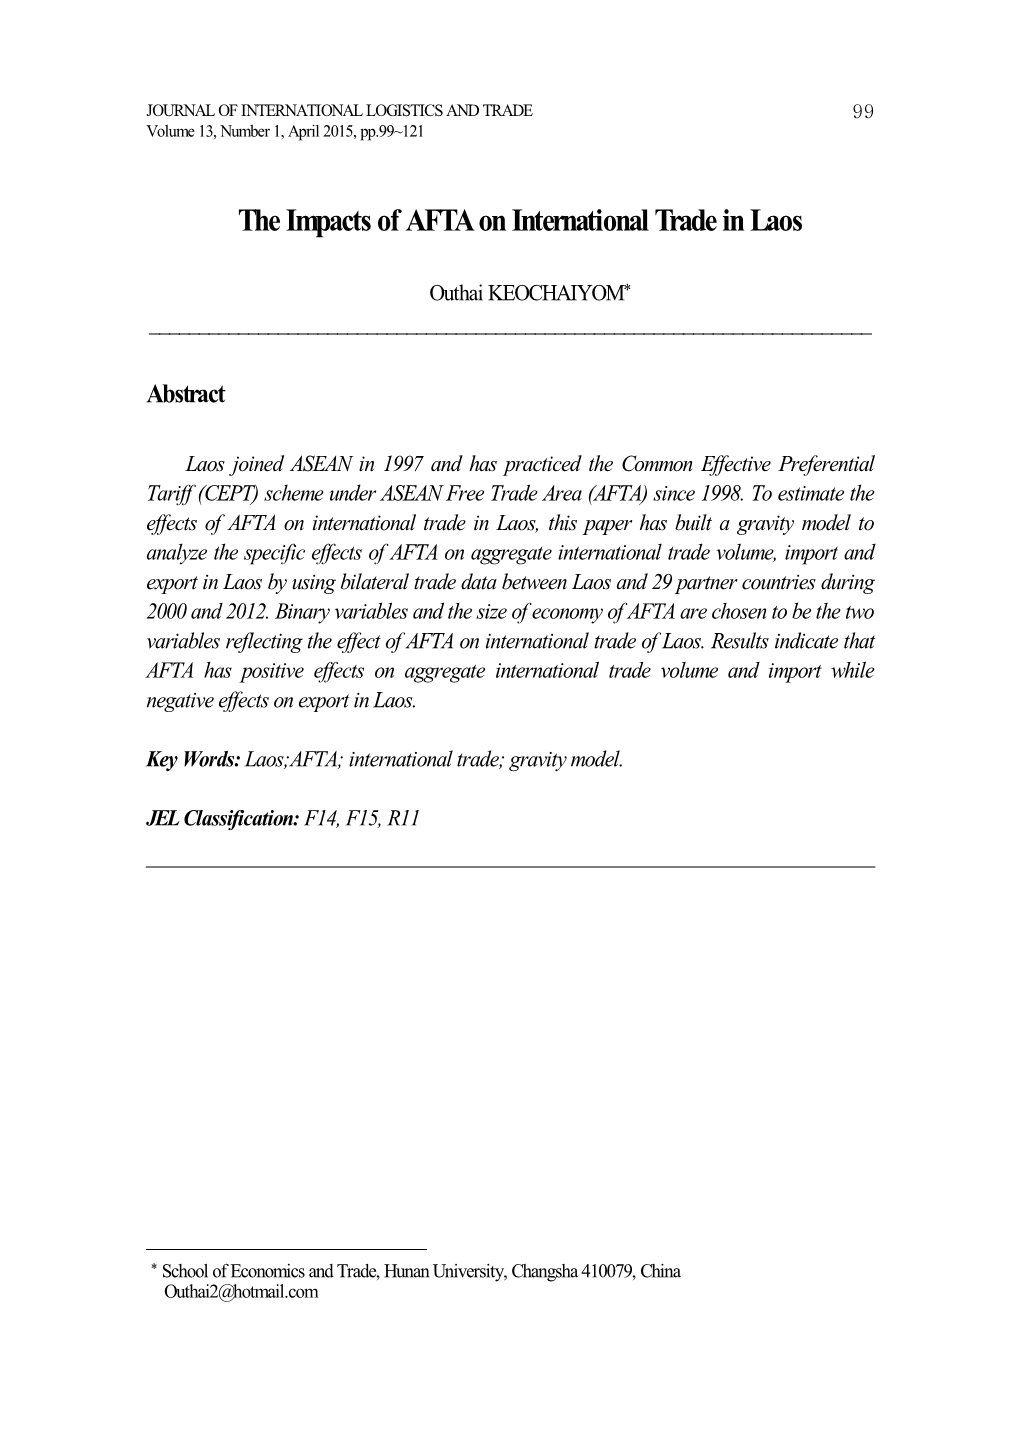 The Impacts of AFTA on International Trade in Laos